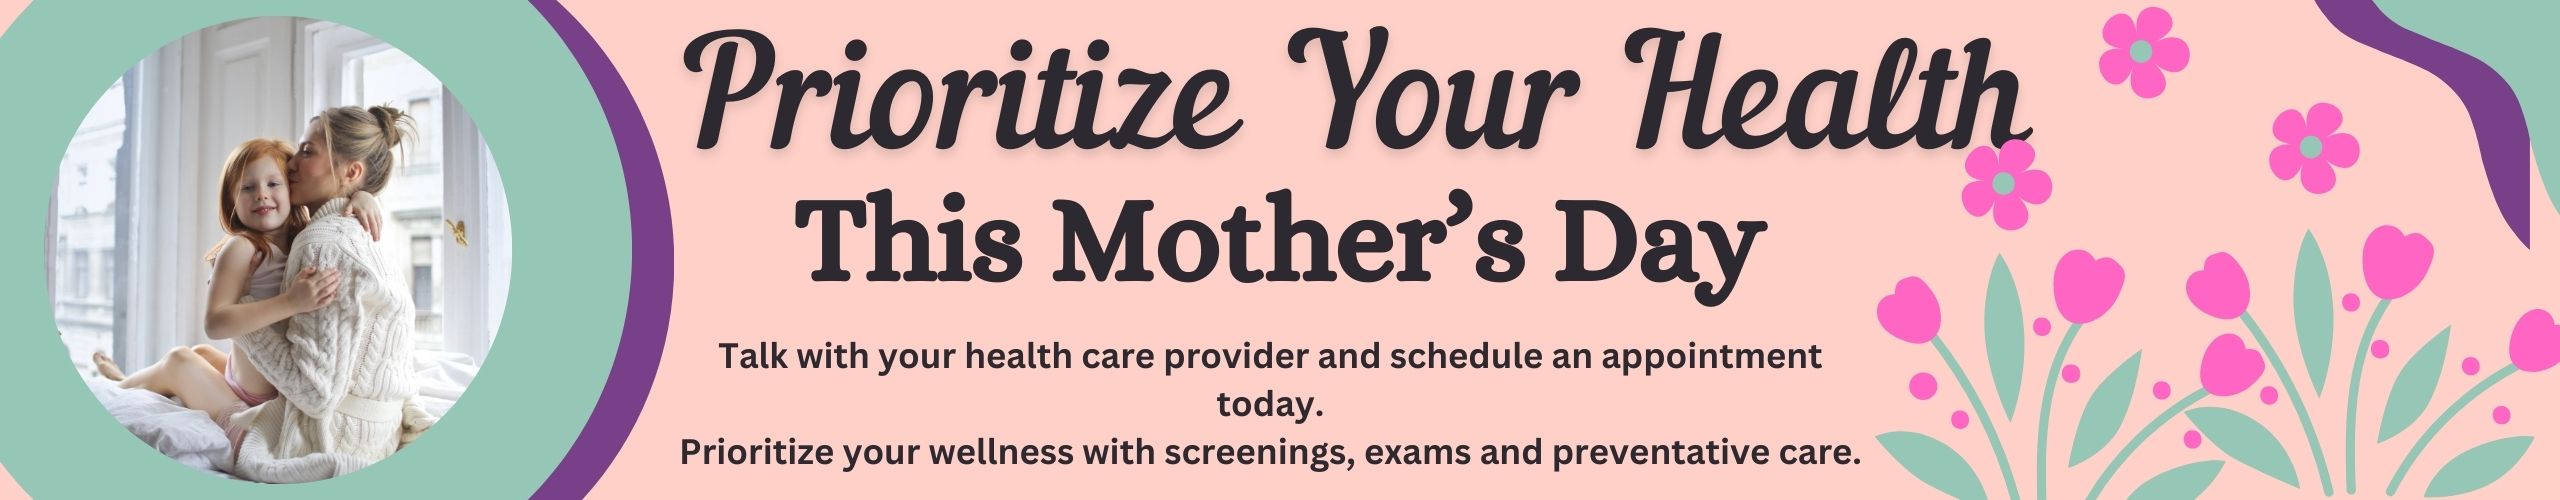 mothers day health